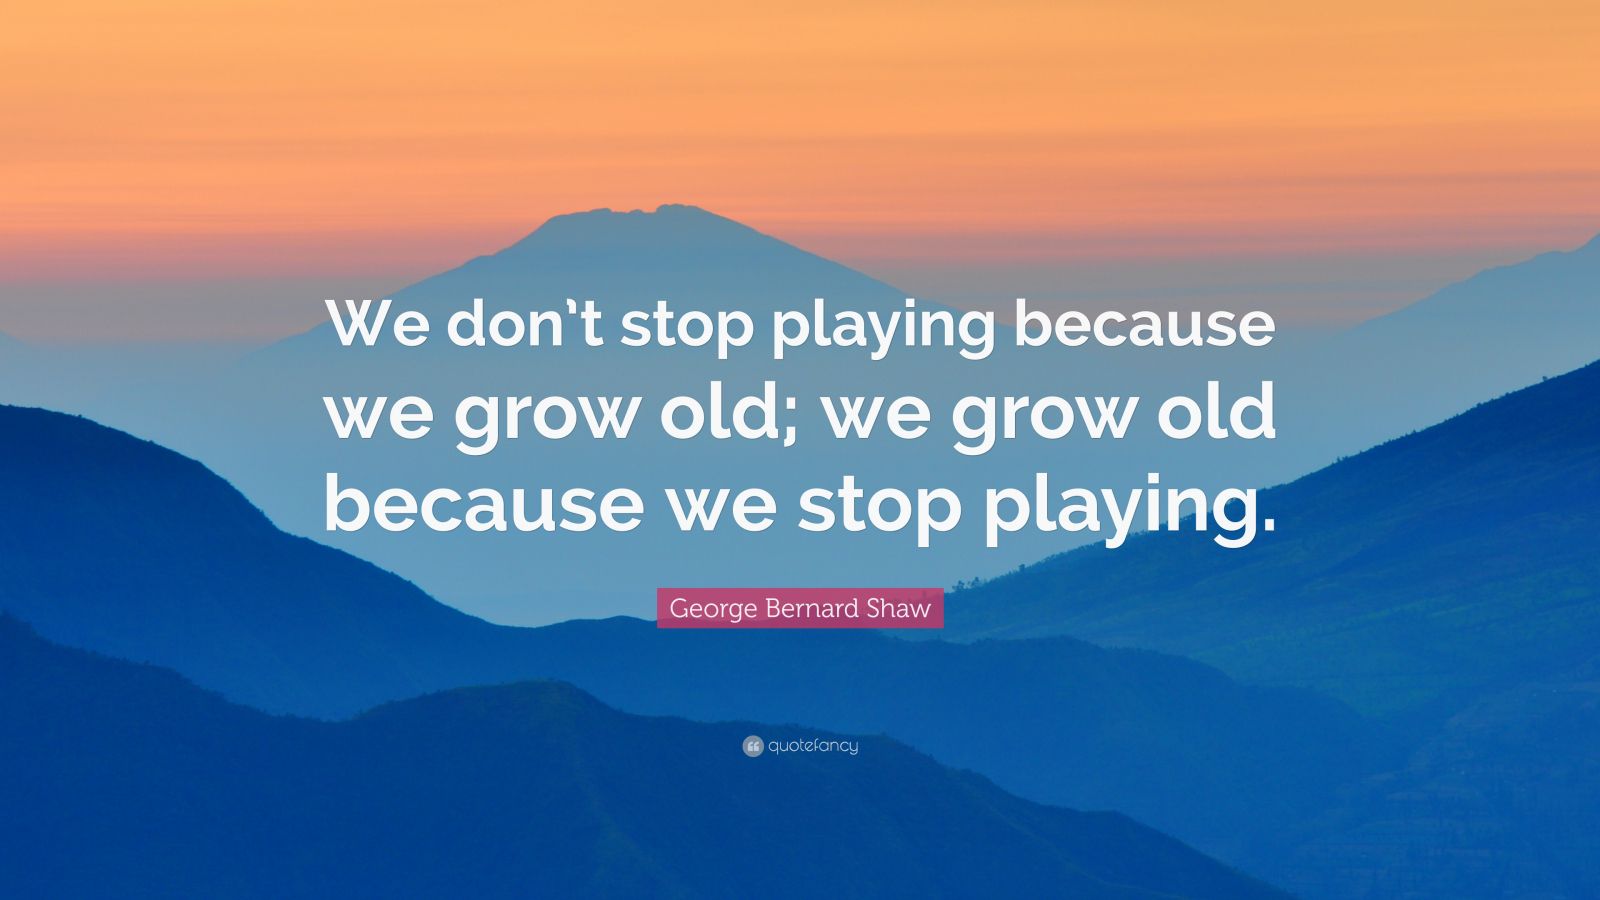 George Bernard Shaw Quote “we Dont Stop Playing Because We Grow Old We Grow Old Because We